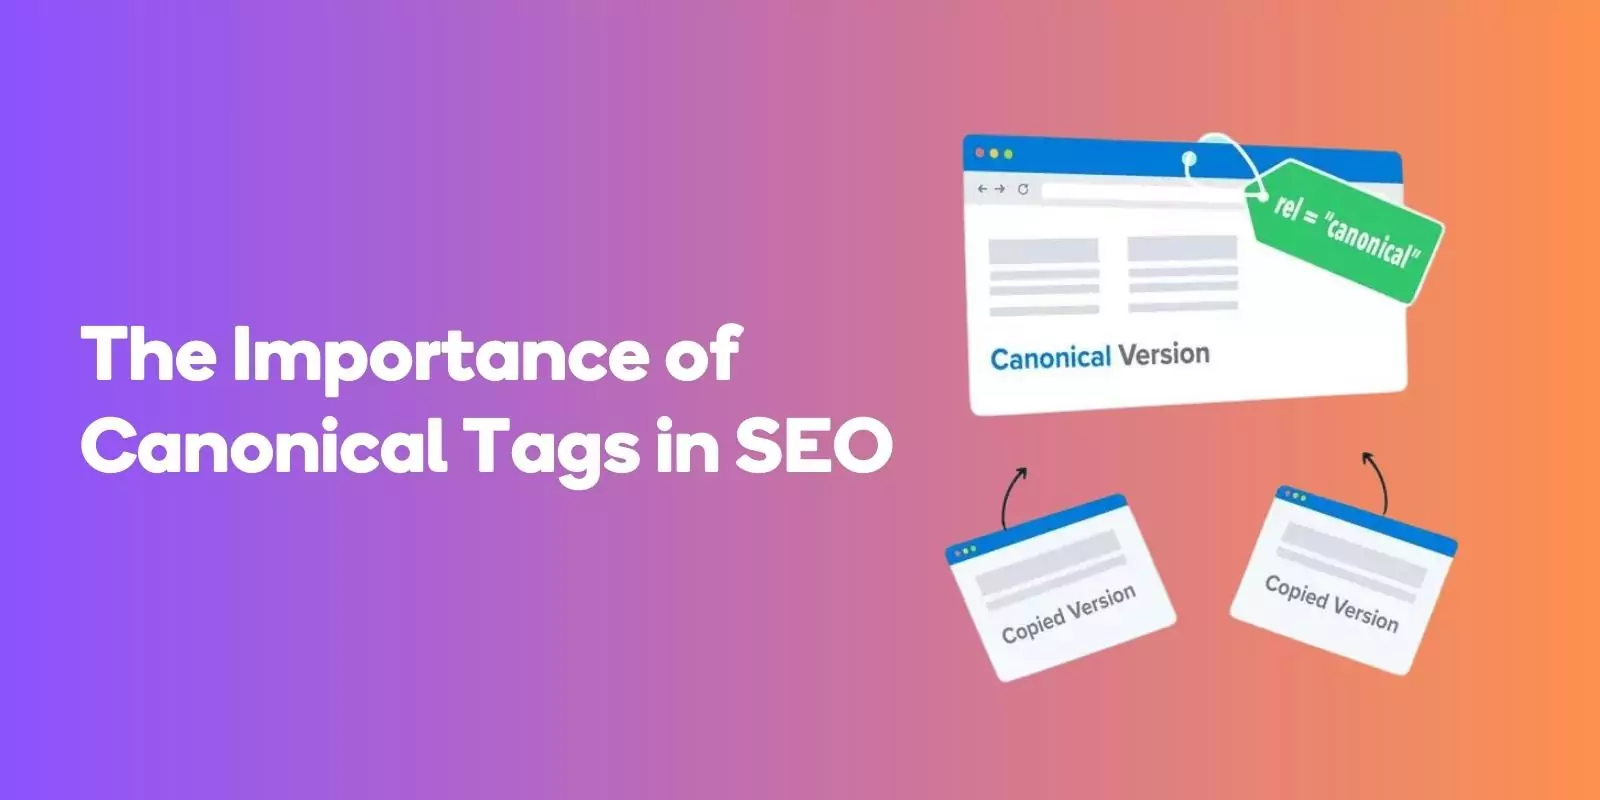 The Importance of Canonical Tags in SEO